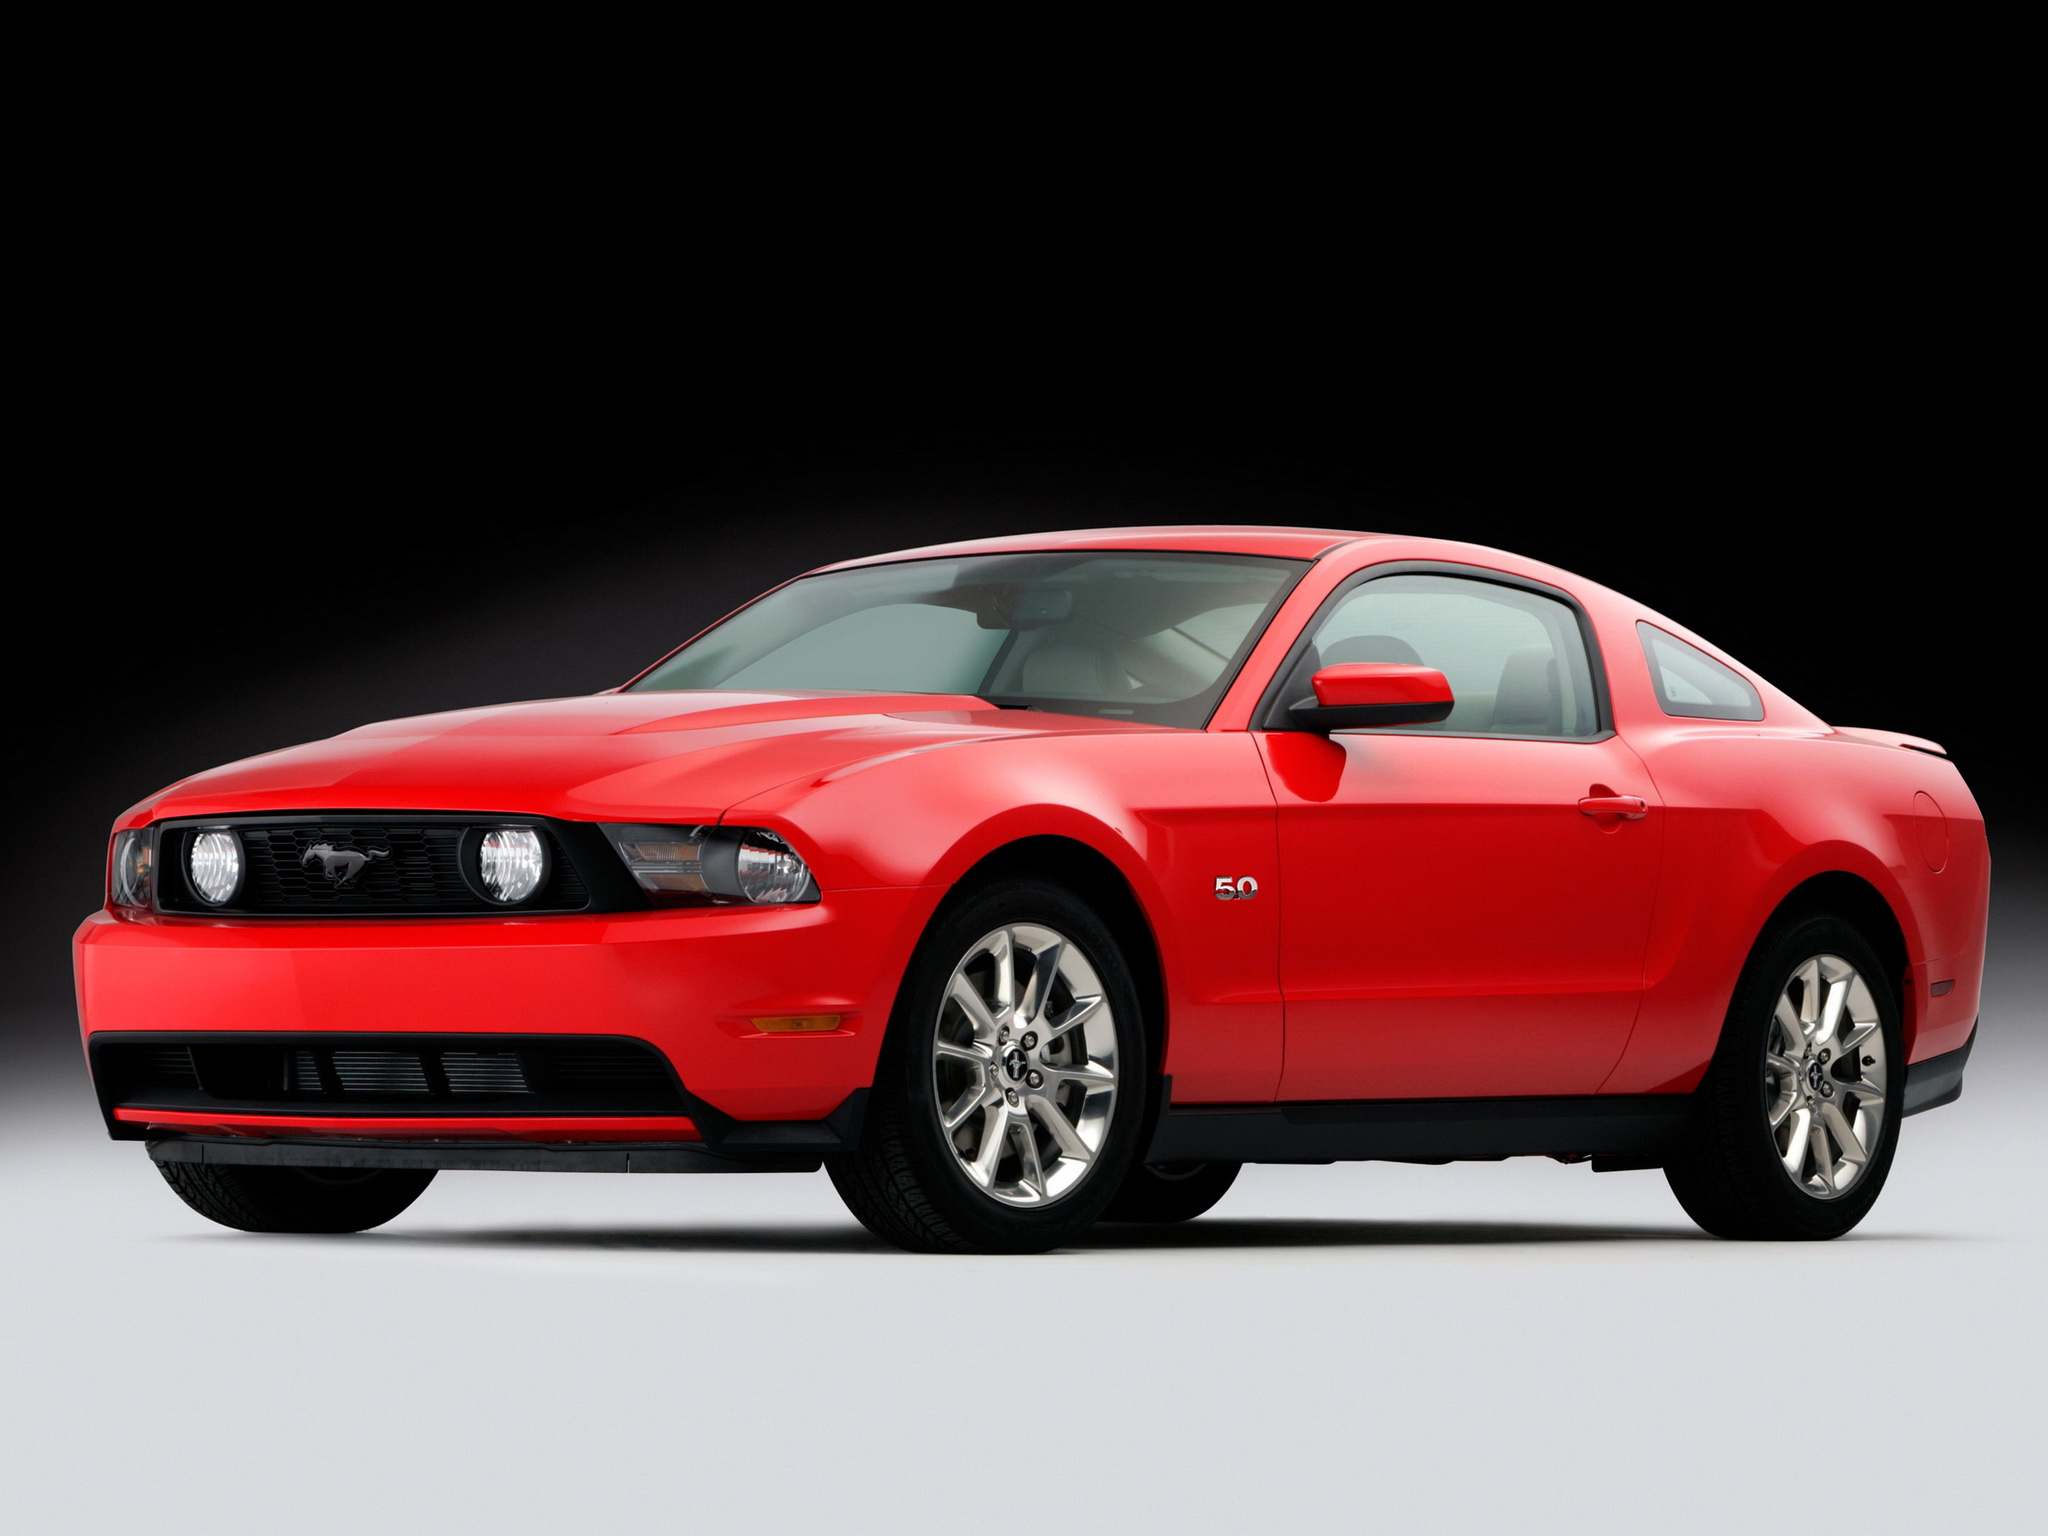 Download full size red front 5.0 GT Mustang wallpaper / 2048x1536